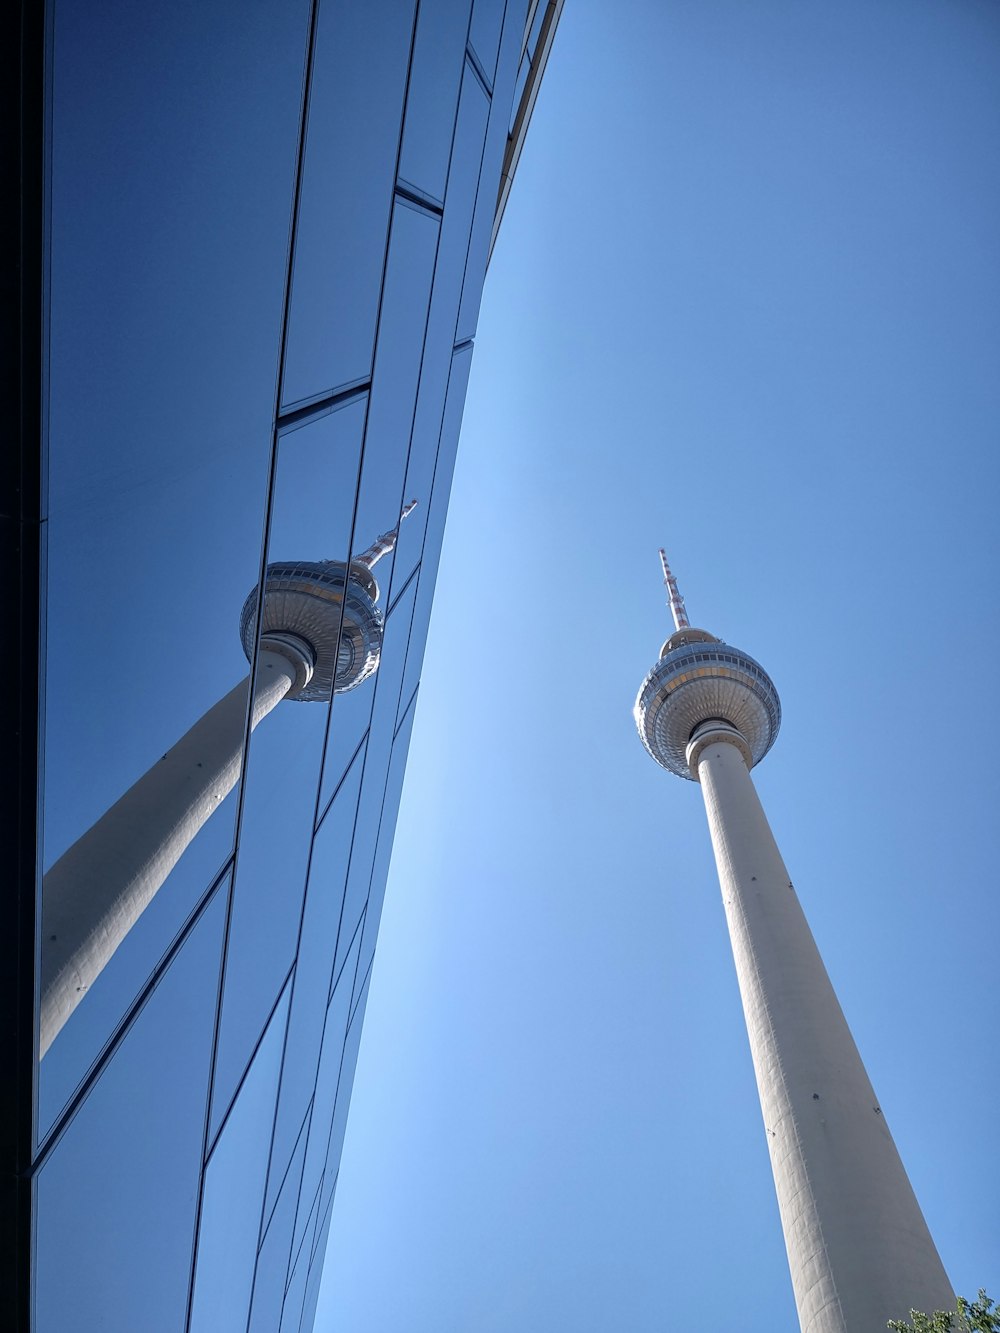 two tall white towers against a blue sky